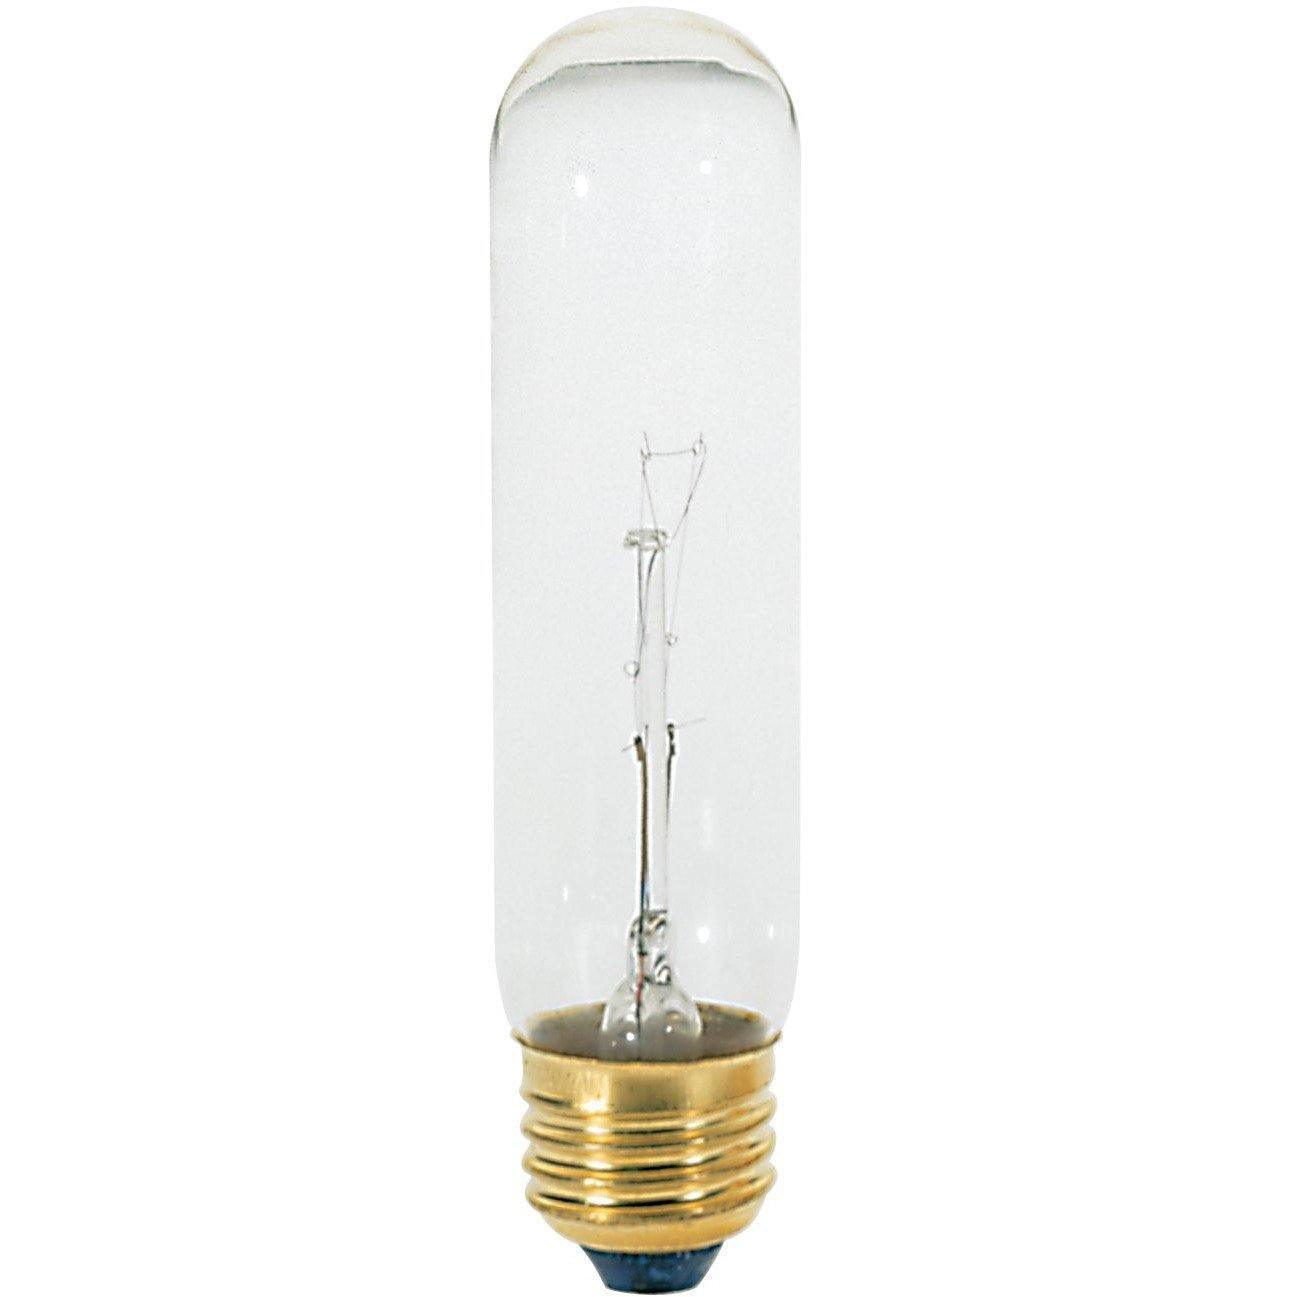 Satco Products - 40 Watt T10 Incandescent, Clear, 2000 Average rated hours, 280 Lumens, Medium base, 120 Volt - S3252 | Montreal Lighting & Hardware